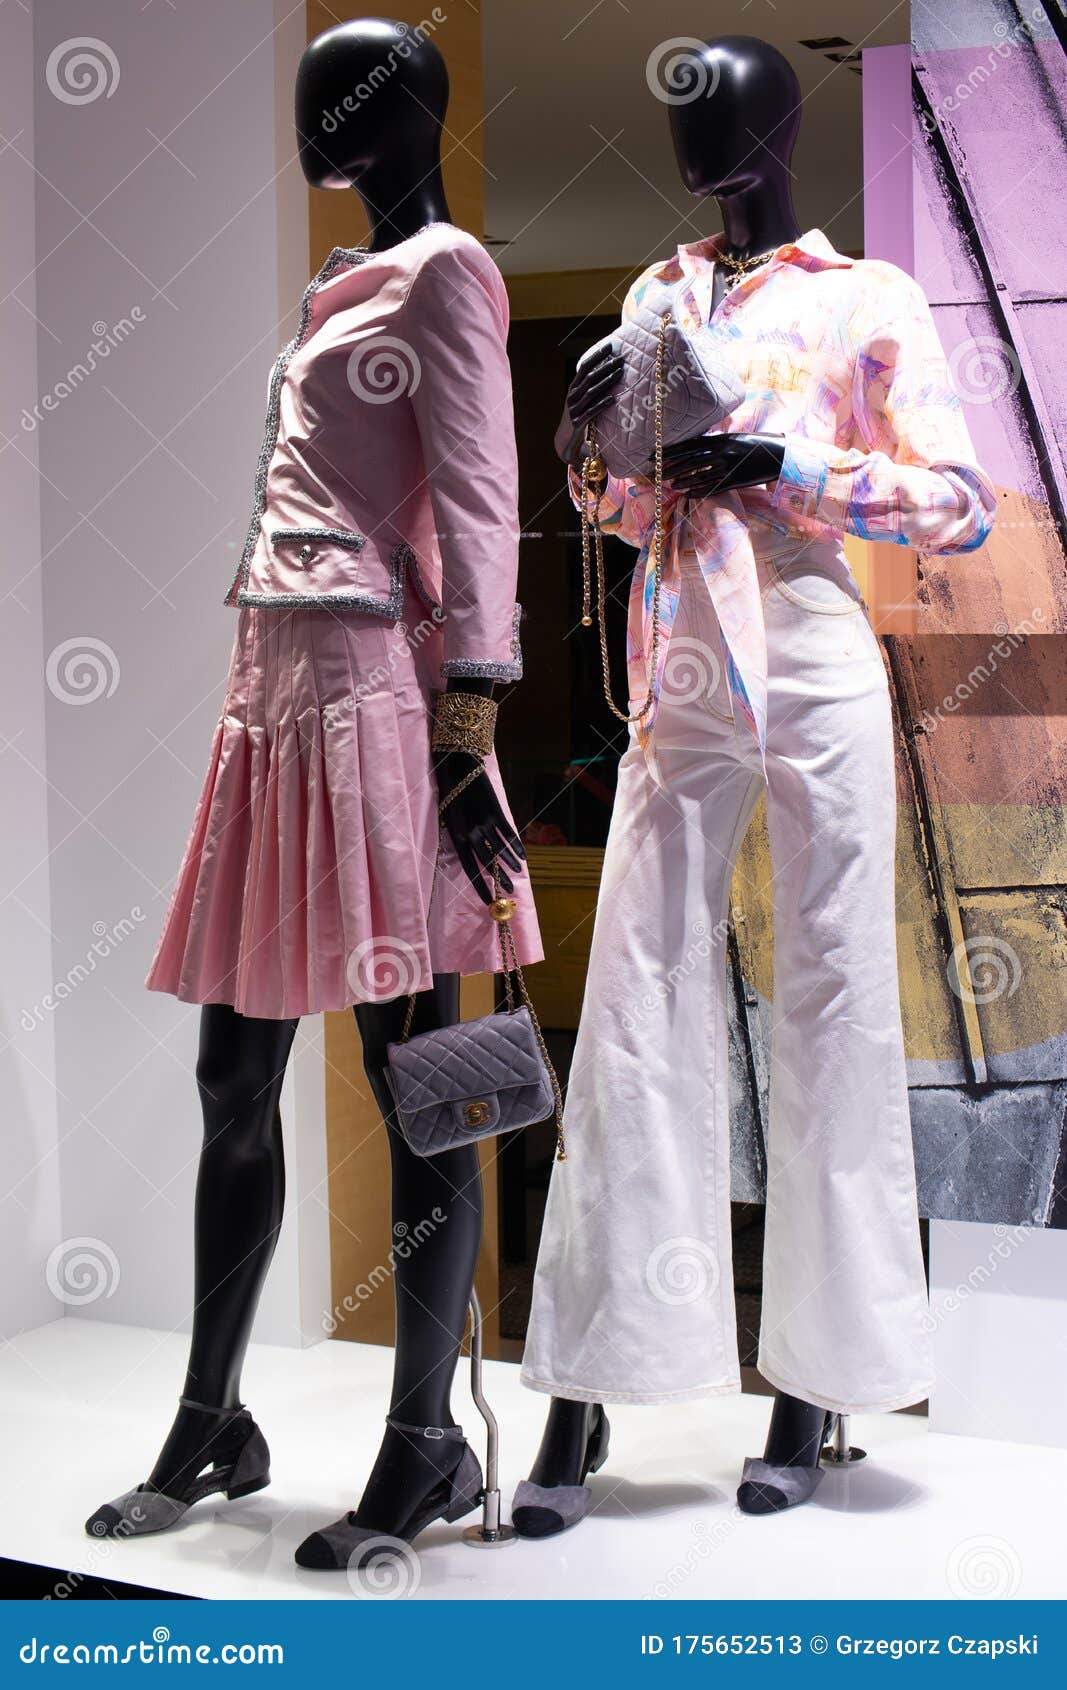 CHANEL Fashion Store, Window Shop, Clothes, Shoes, Bags on Display for Sale,  Modern CHANEL Fashion House Editorial Stock Photo - Image of beautiful,  interior: 175652513